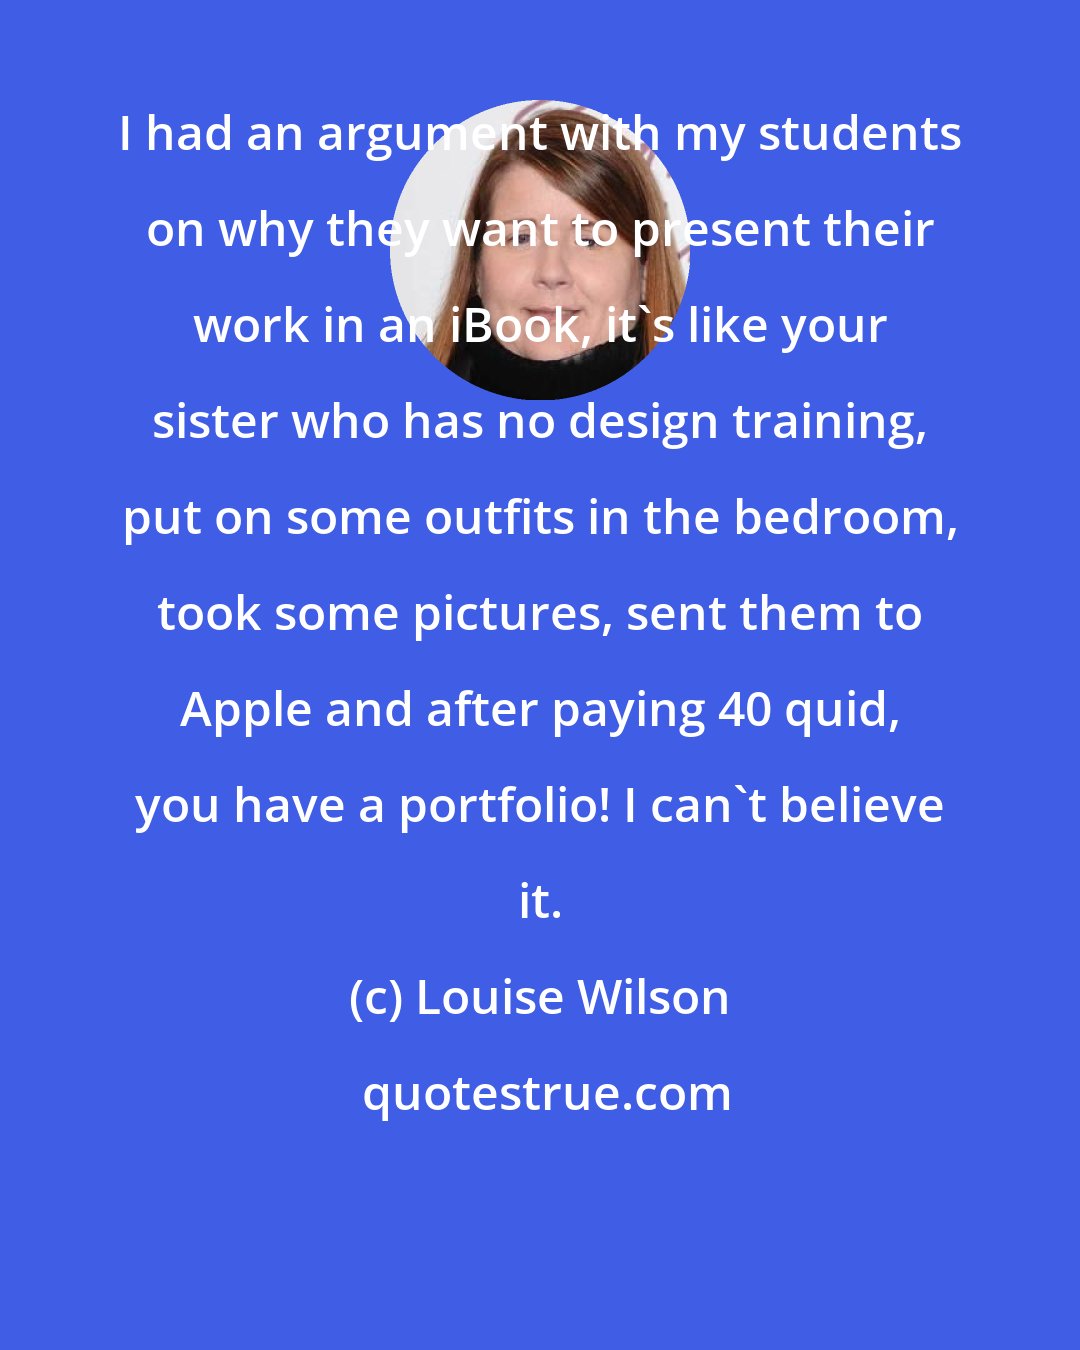 Louise Wilson: I had an argument with my students on why they want to present their work in an iBook, it's like your sister who has no design training, put on some outfits in the bedroom, took some pictures, sent them to Apple and after paying 40 quid, you have a portfolio! I can't believe it.